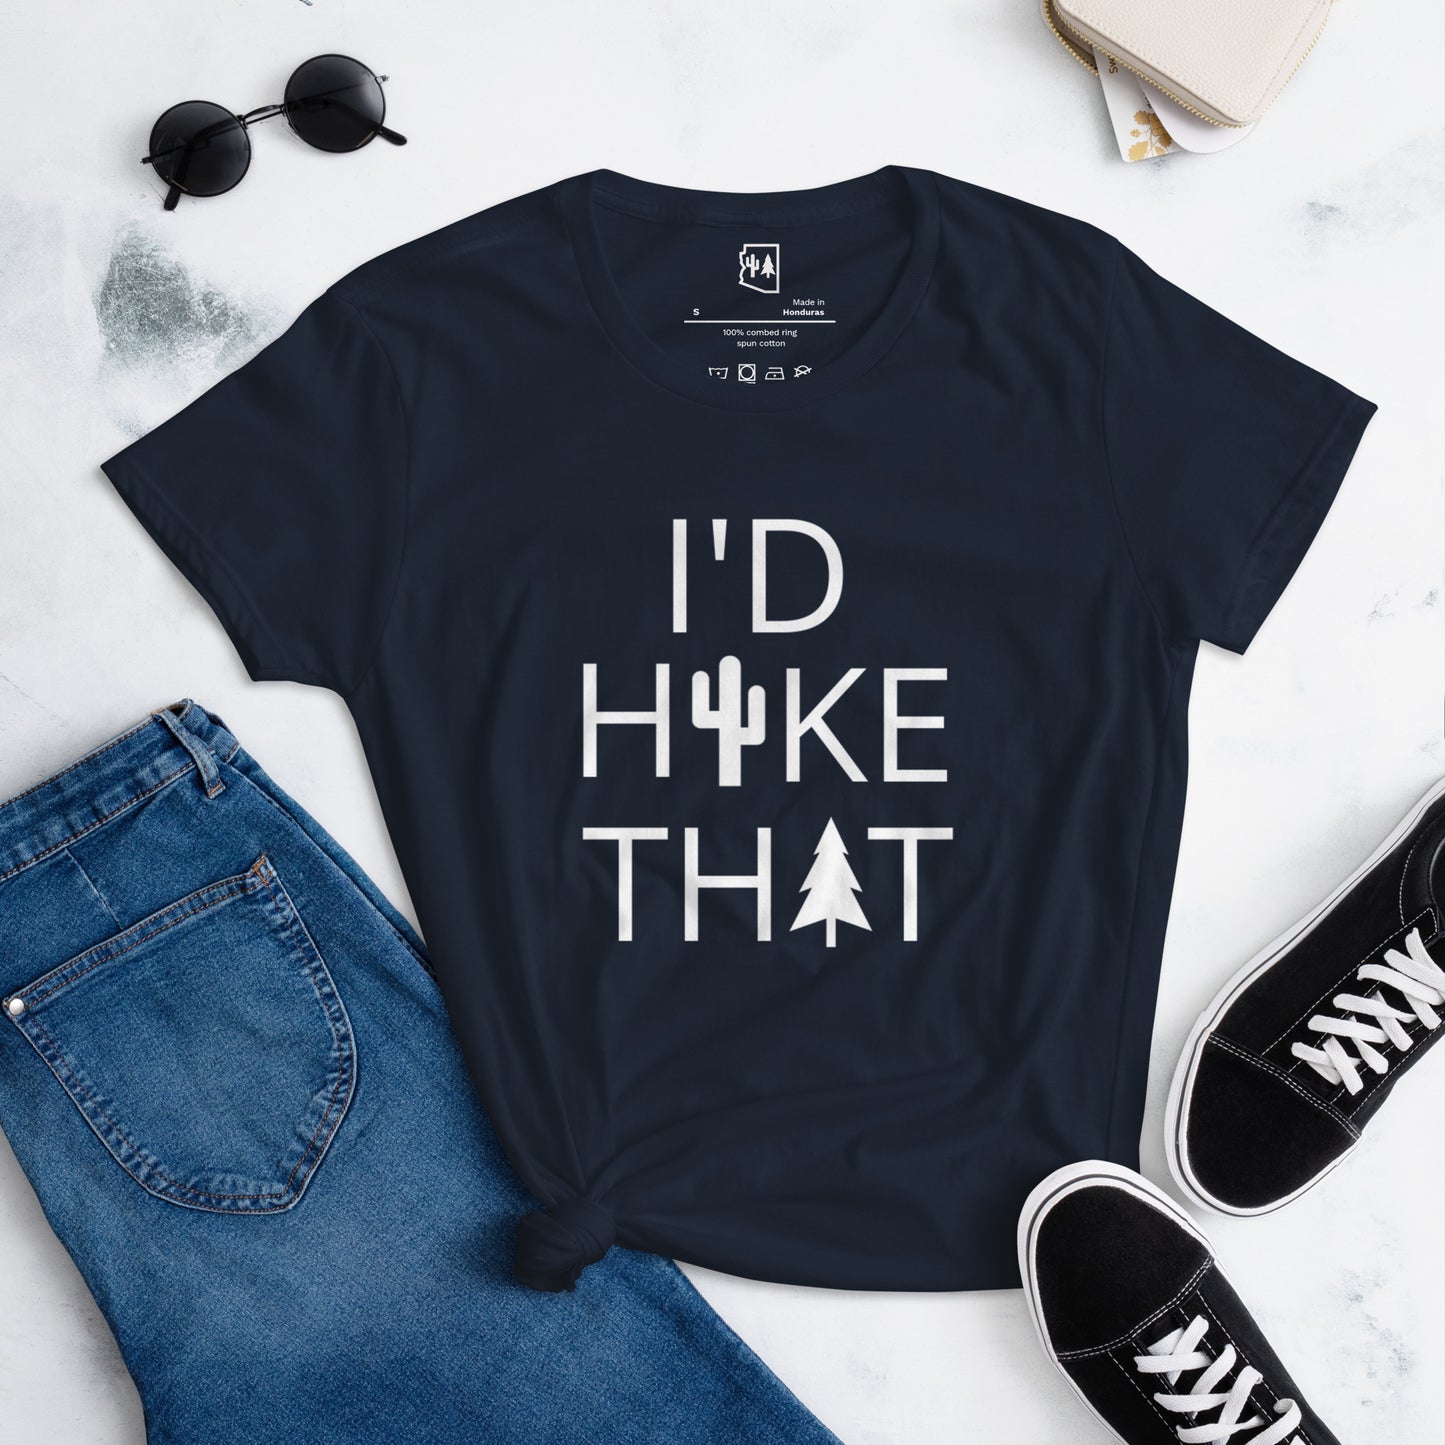 Arizona Trails I'd Hike That Tee - Saguaro and Pine (available in 6 colors)